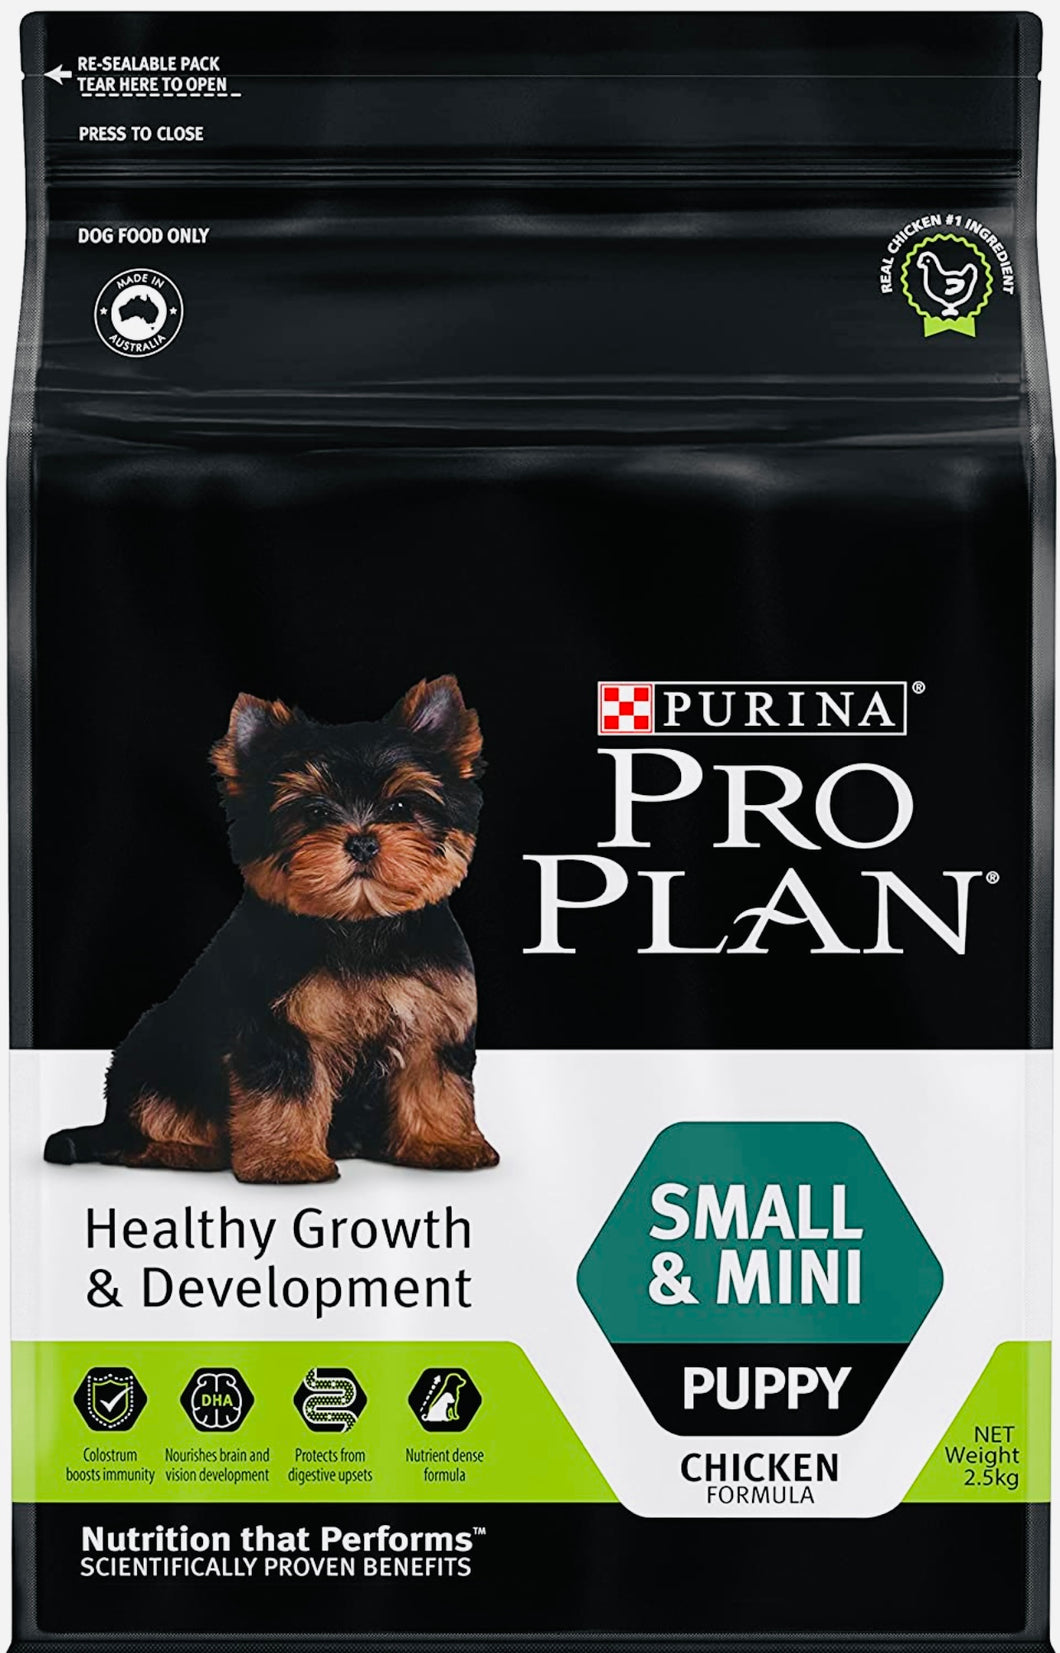 Purina pro plan small and mini puppy dog food 2.5kg